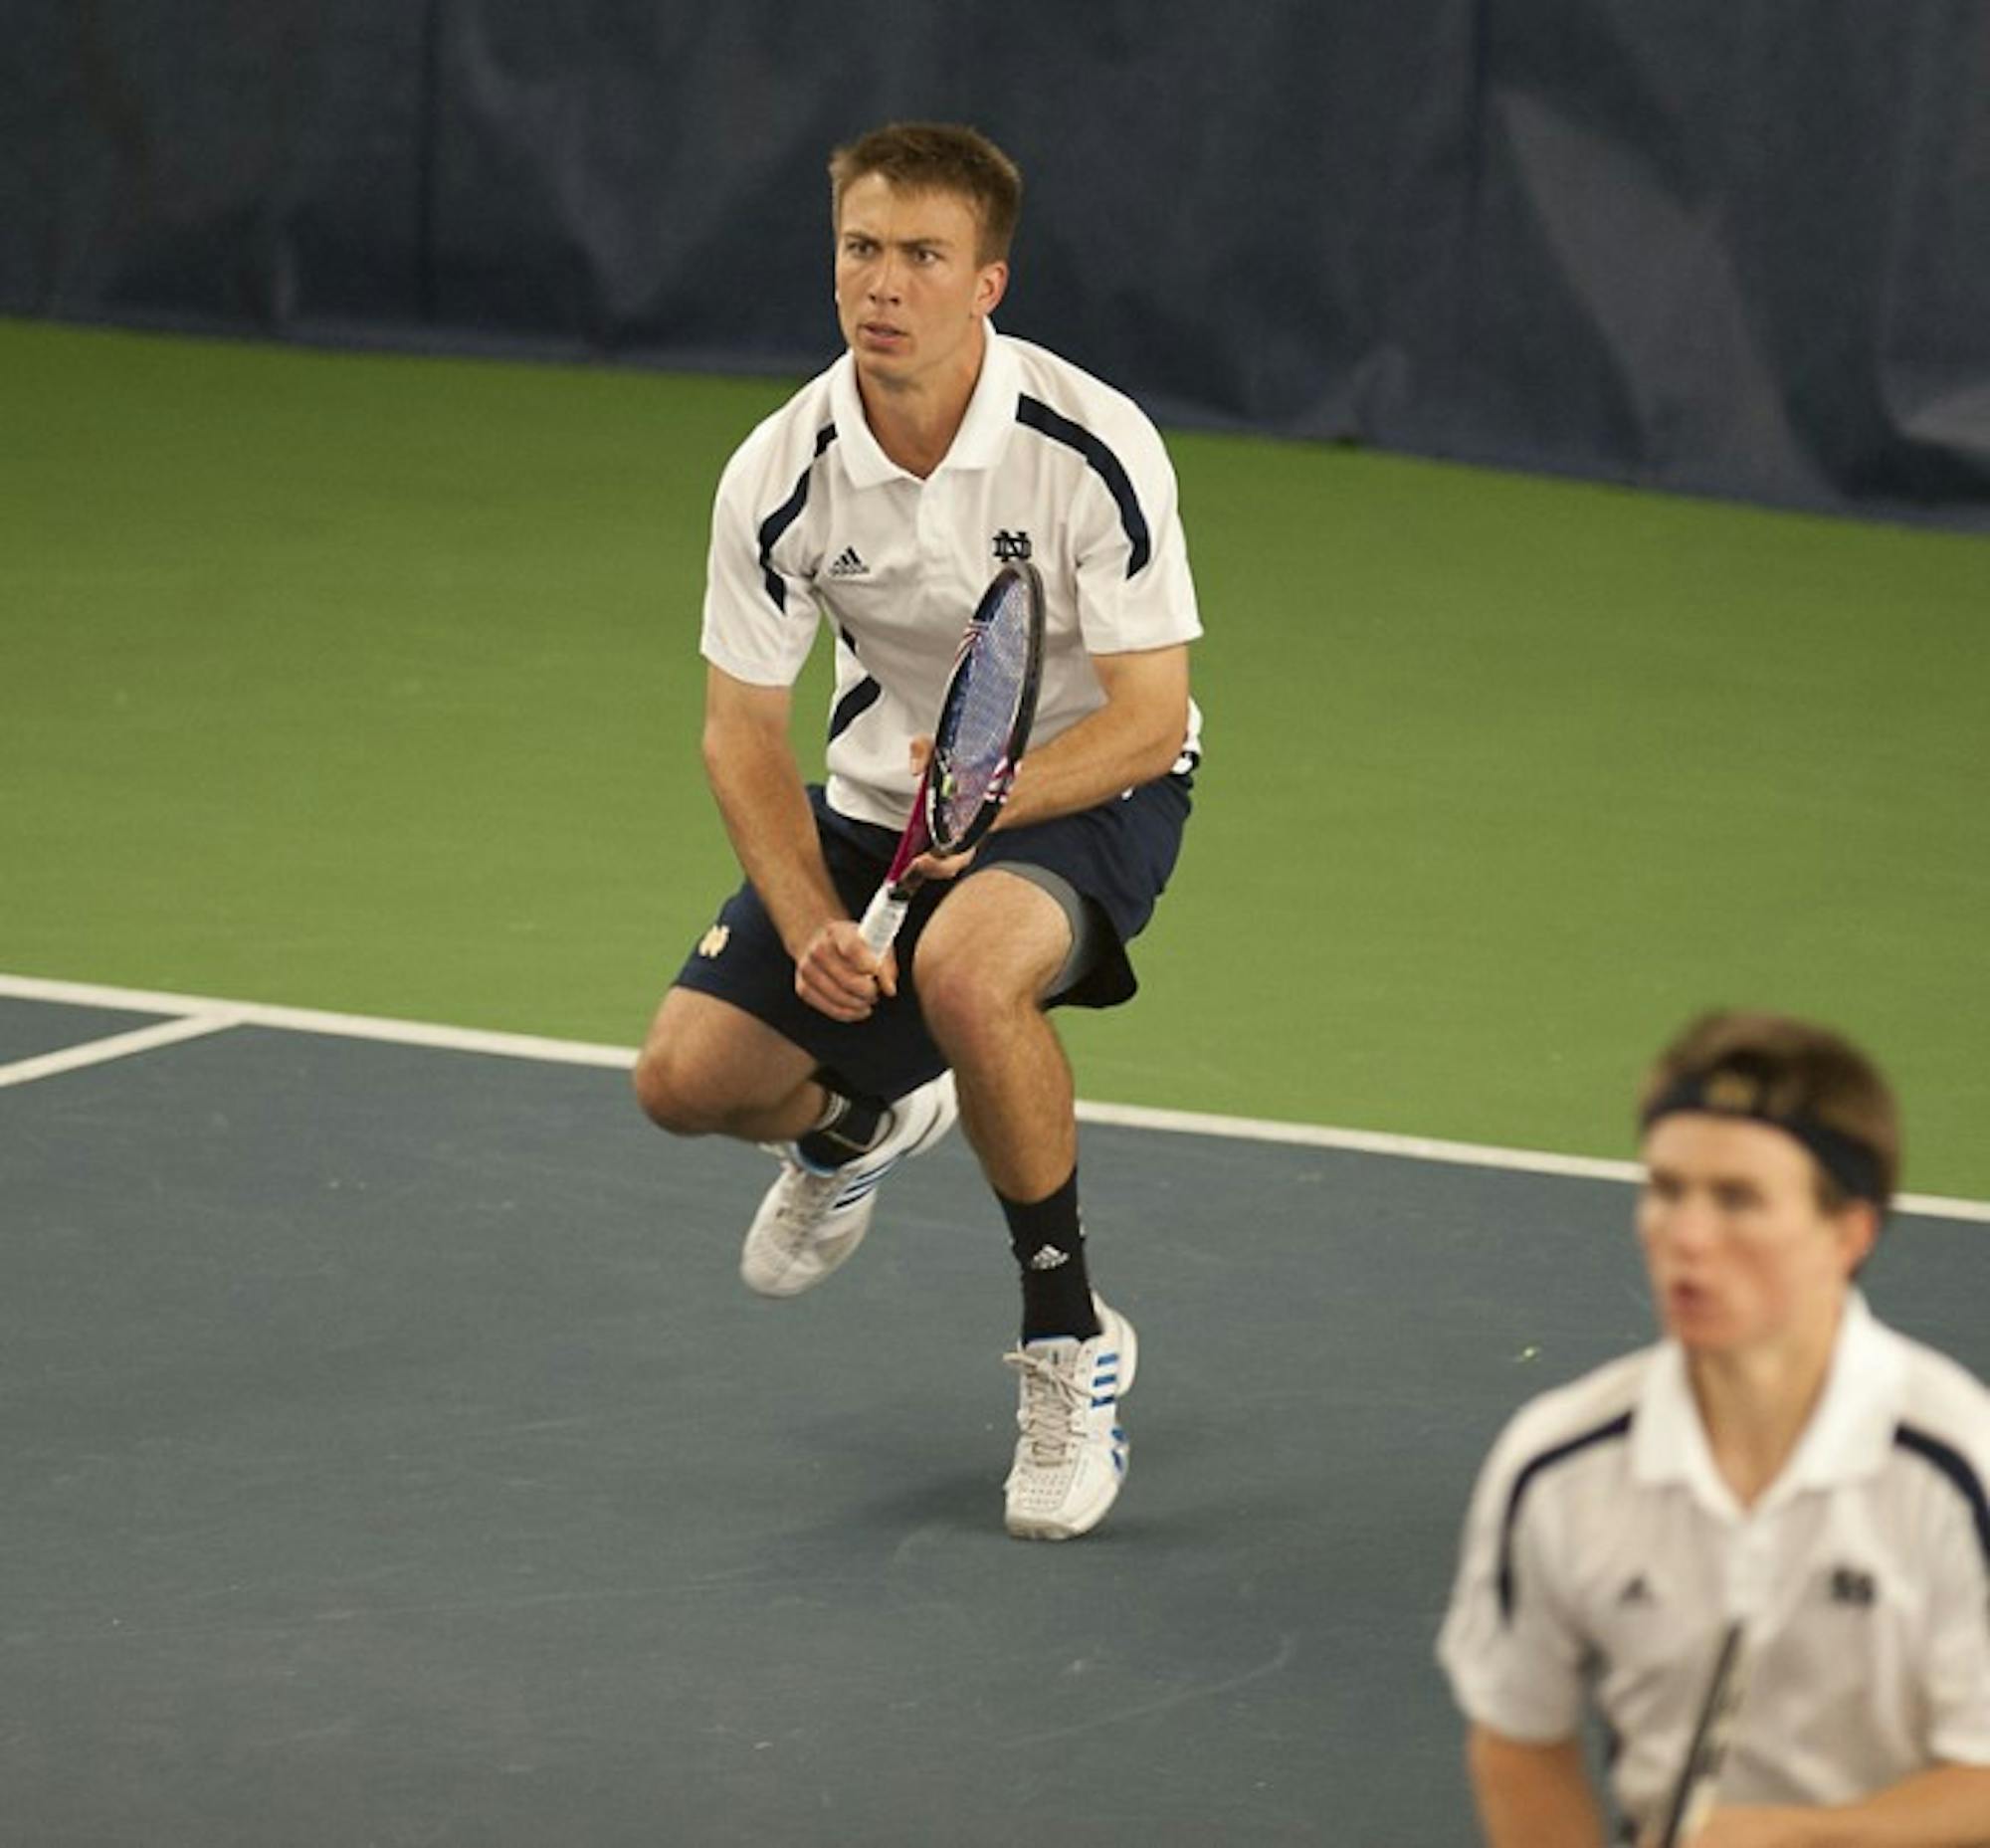 Matt Dooley, a senior tennis player,  detailed his life as a gay athlete at Notre Dame in an article published Monday on Outsports.com.